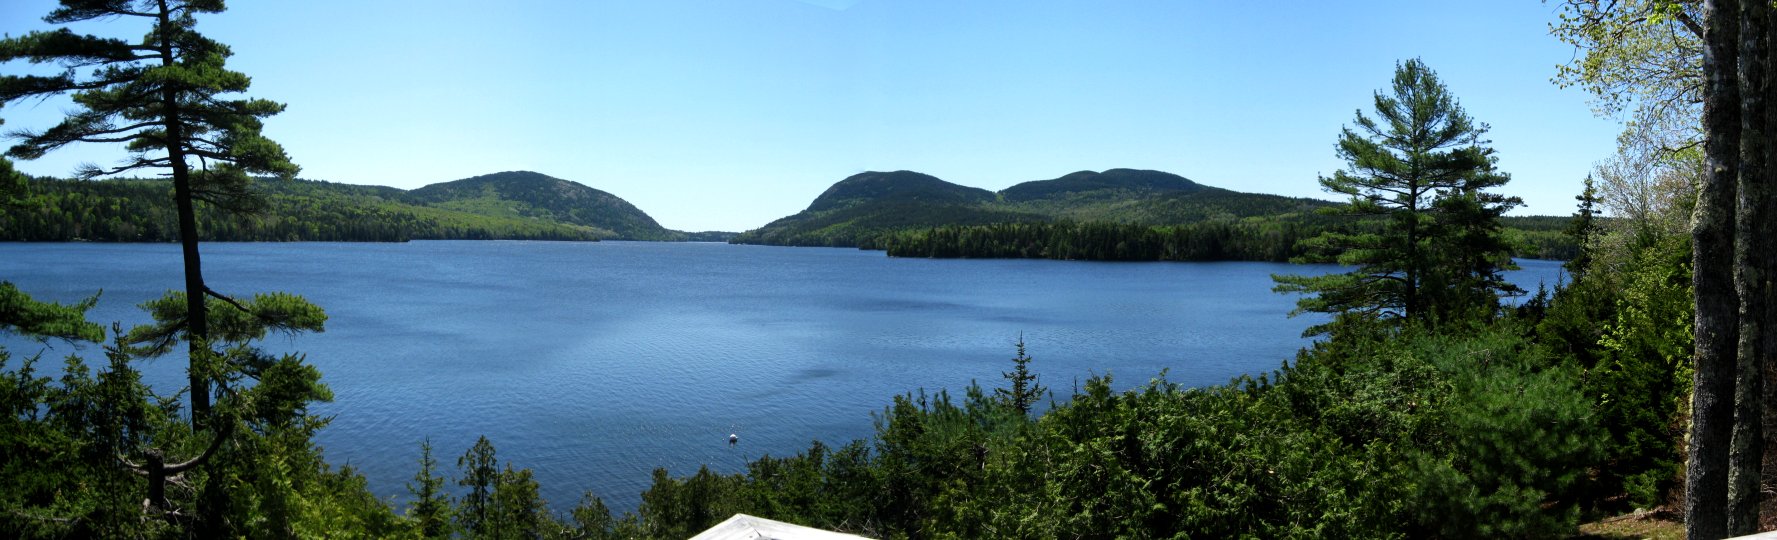 Perfect Day overlooking Long Pond and Acadia's Mountains